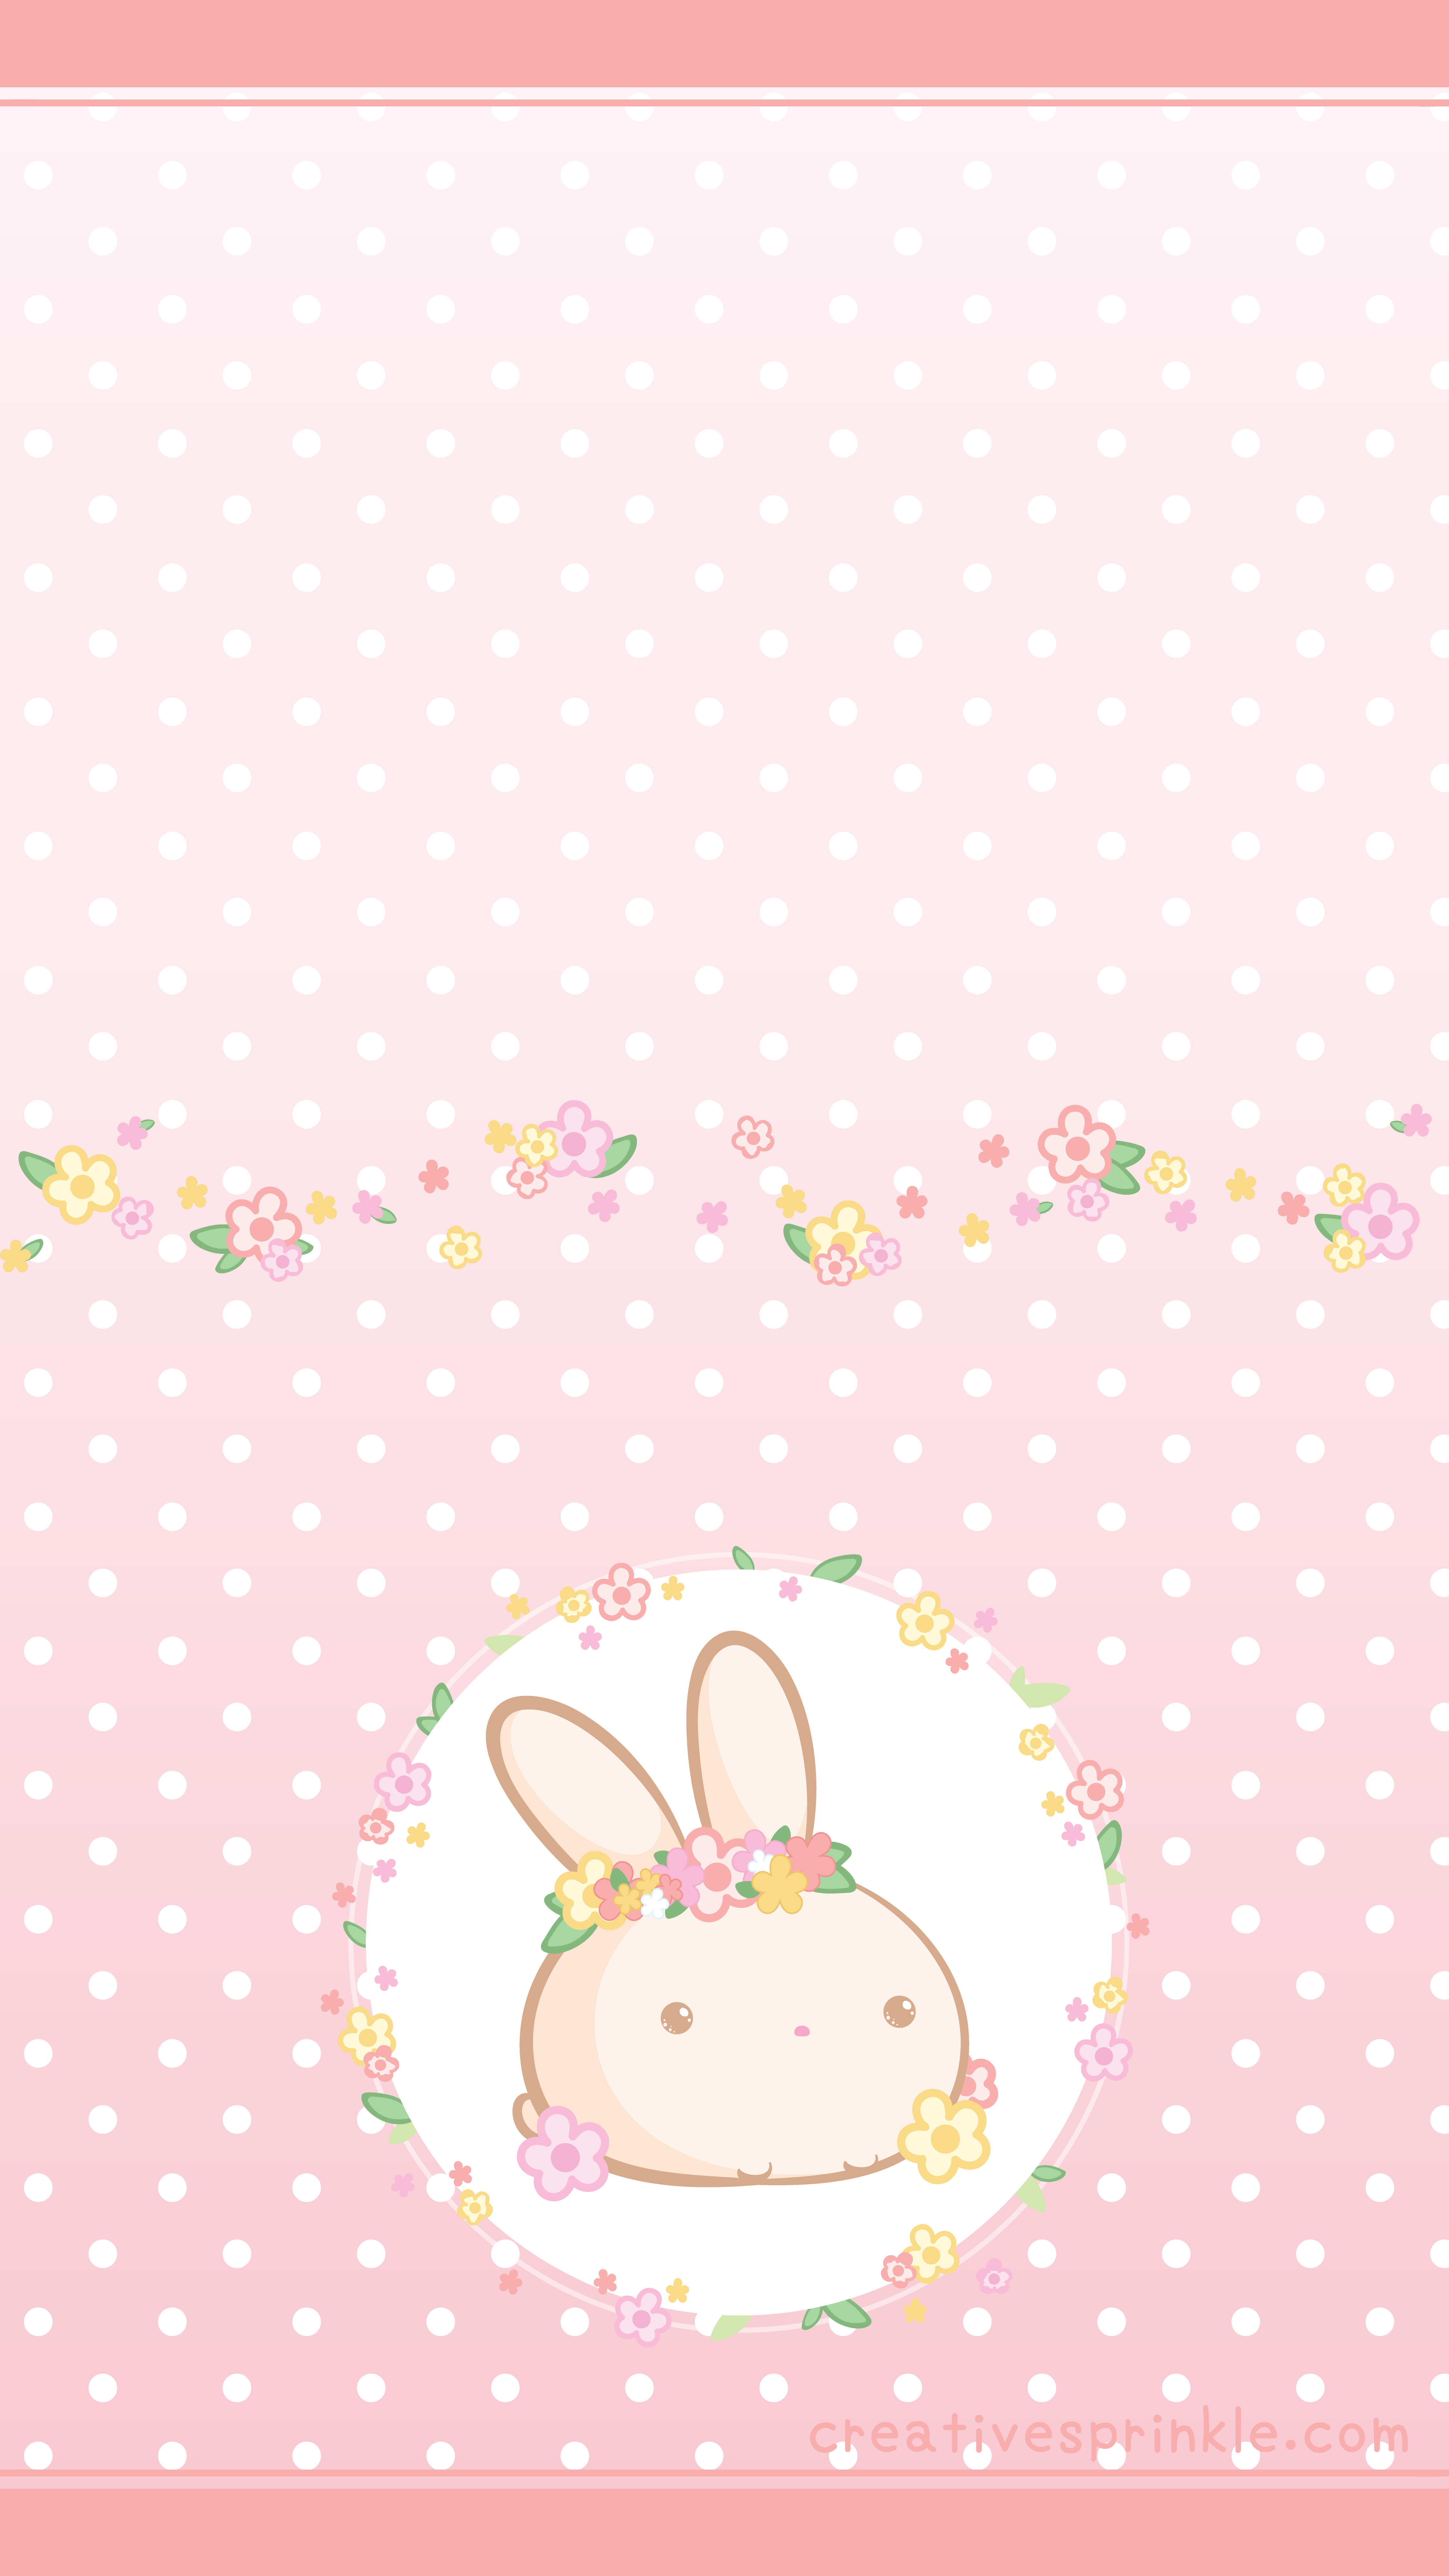 kawaii brown baby bunny with floral wreaths pink wallpaper. Pink